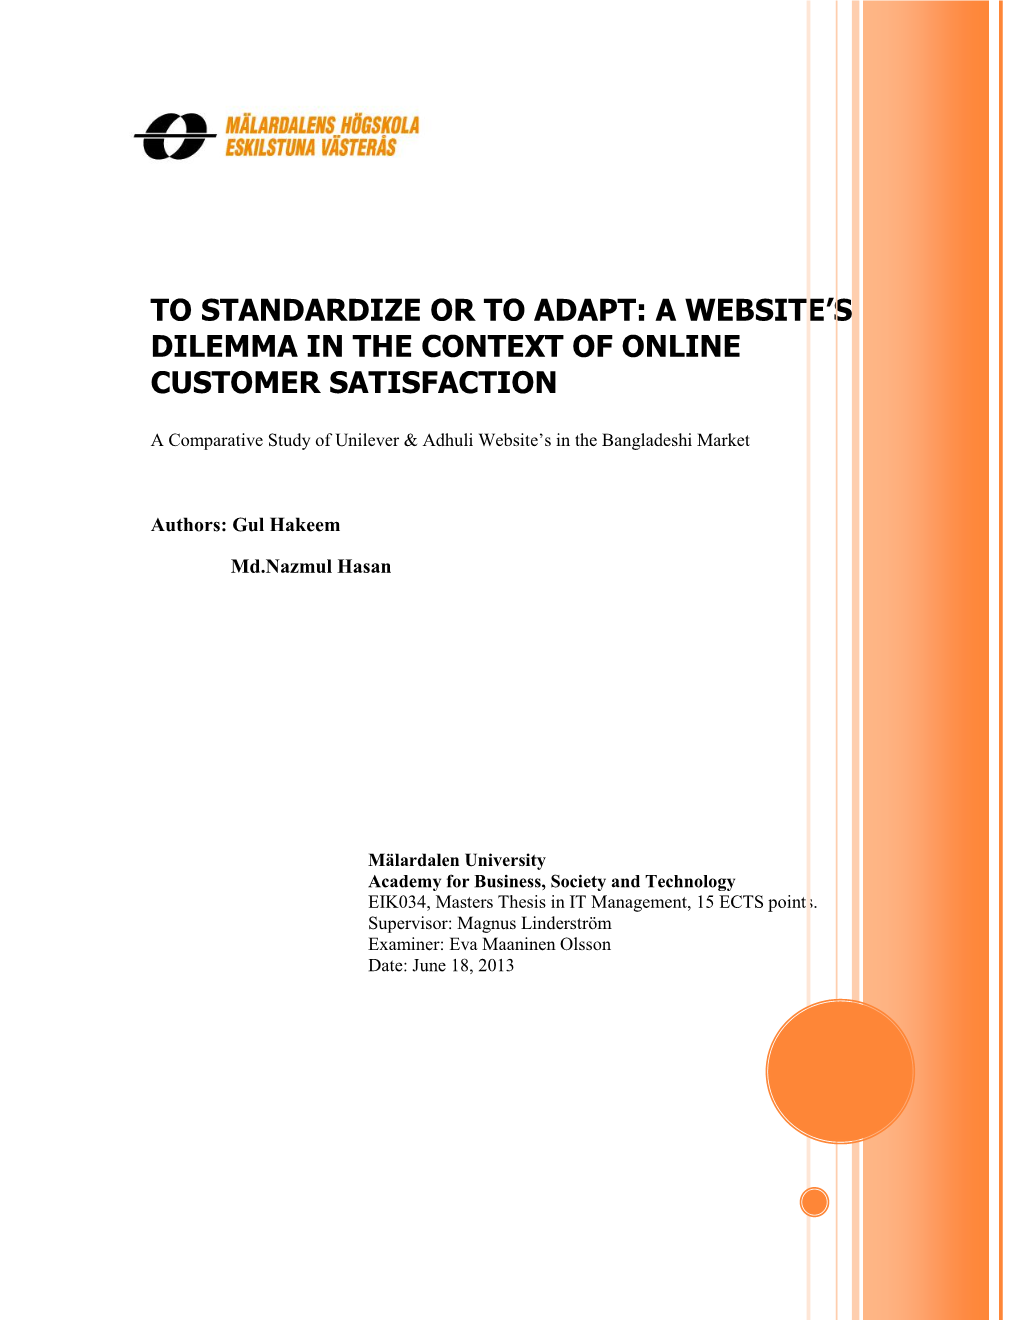 To Standardize Or to Adapt: a Website’S Dilemma in the Context of Online Customer Satisfaction